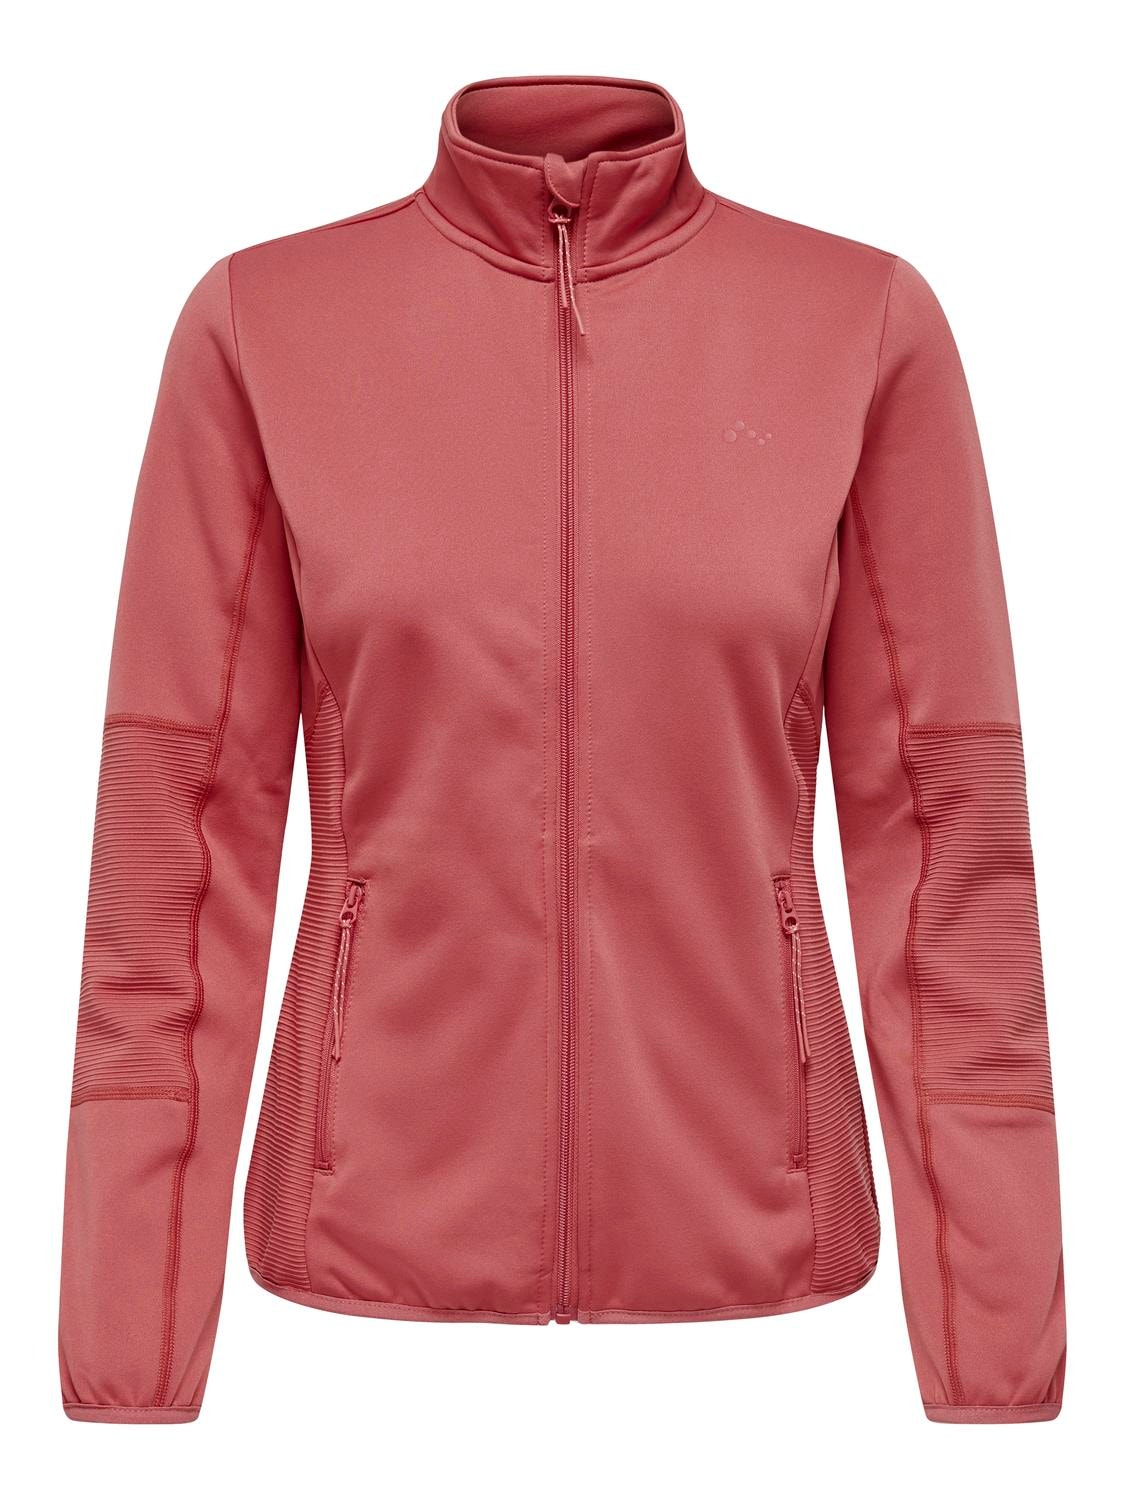 ONLY Training Fleece jacket -Mineral Red - 15233181